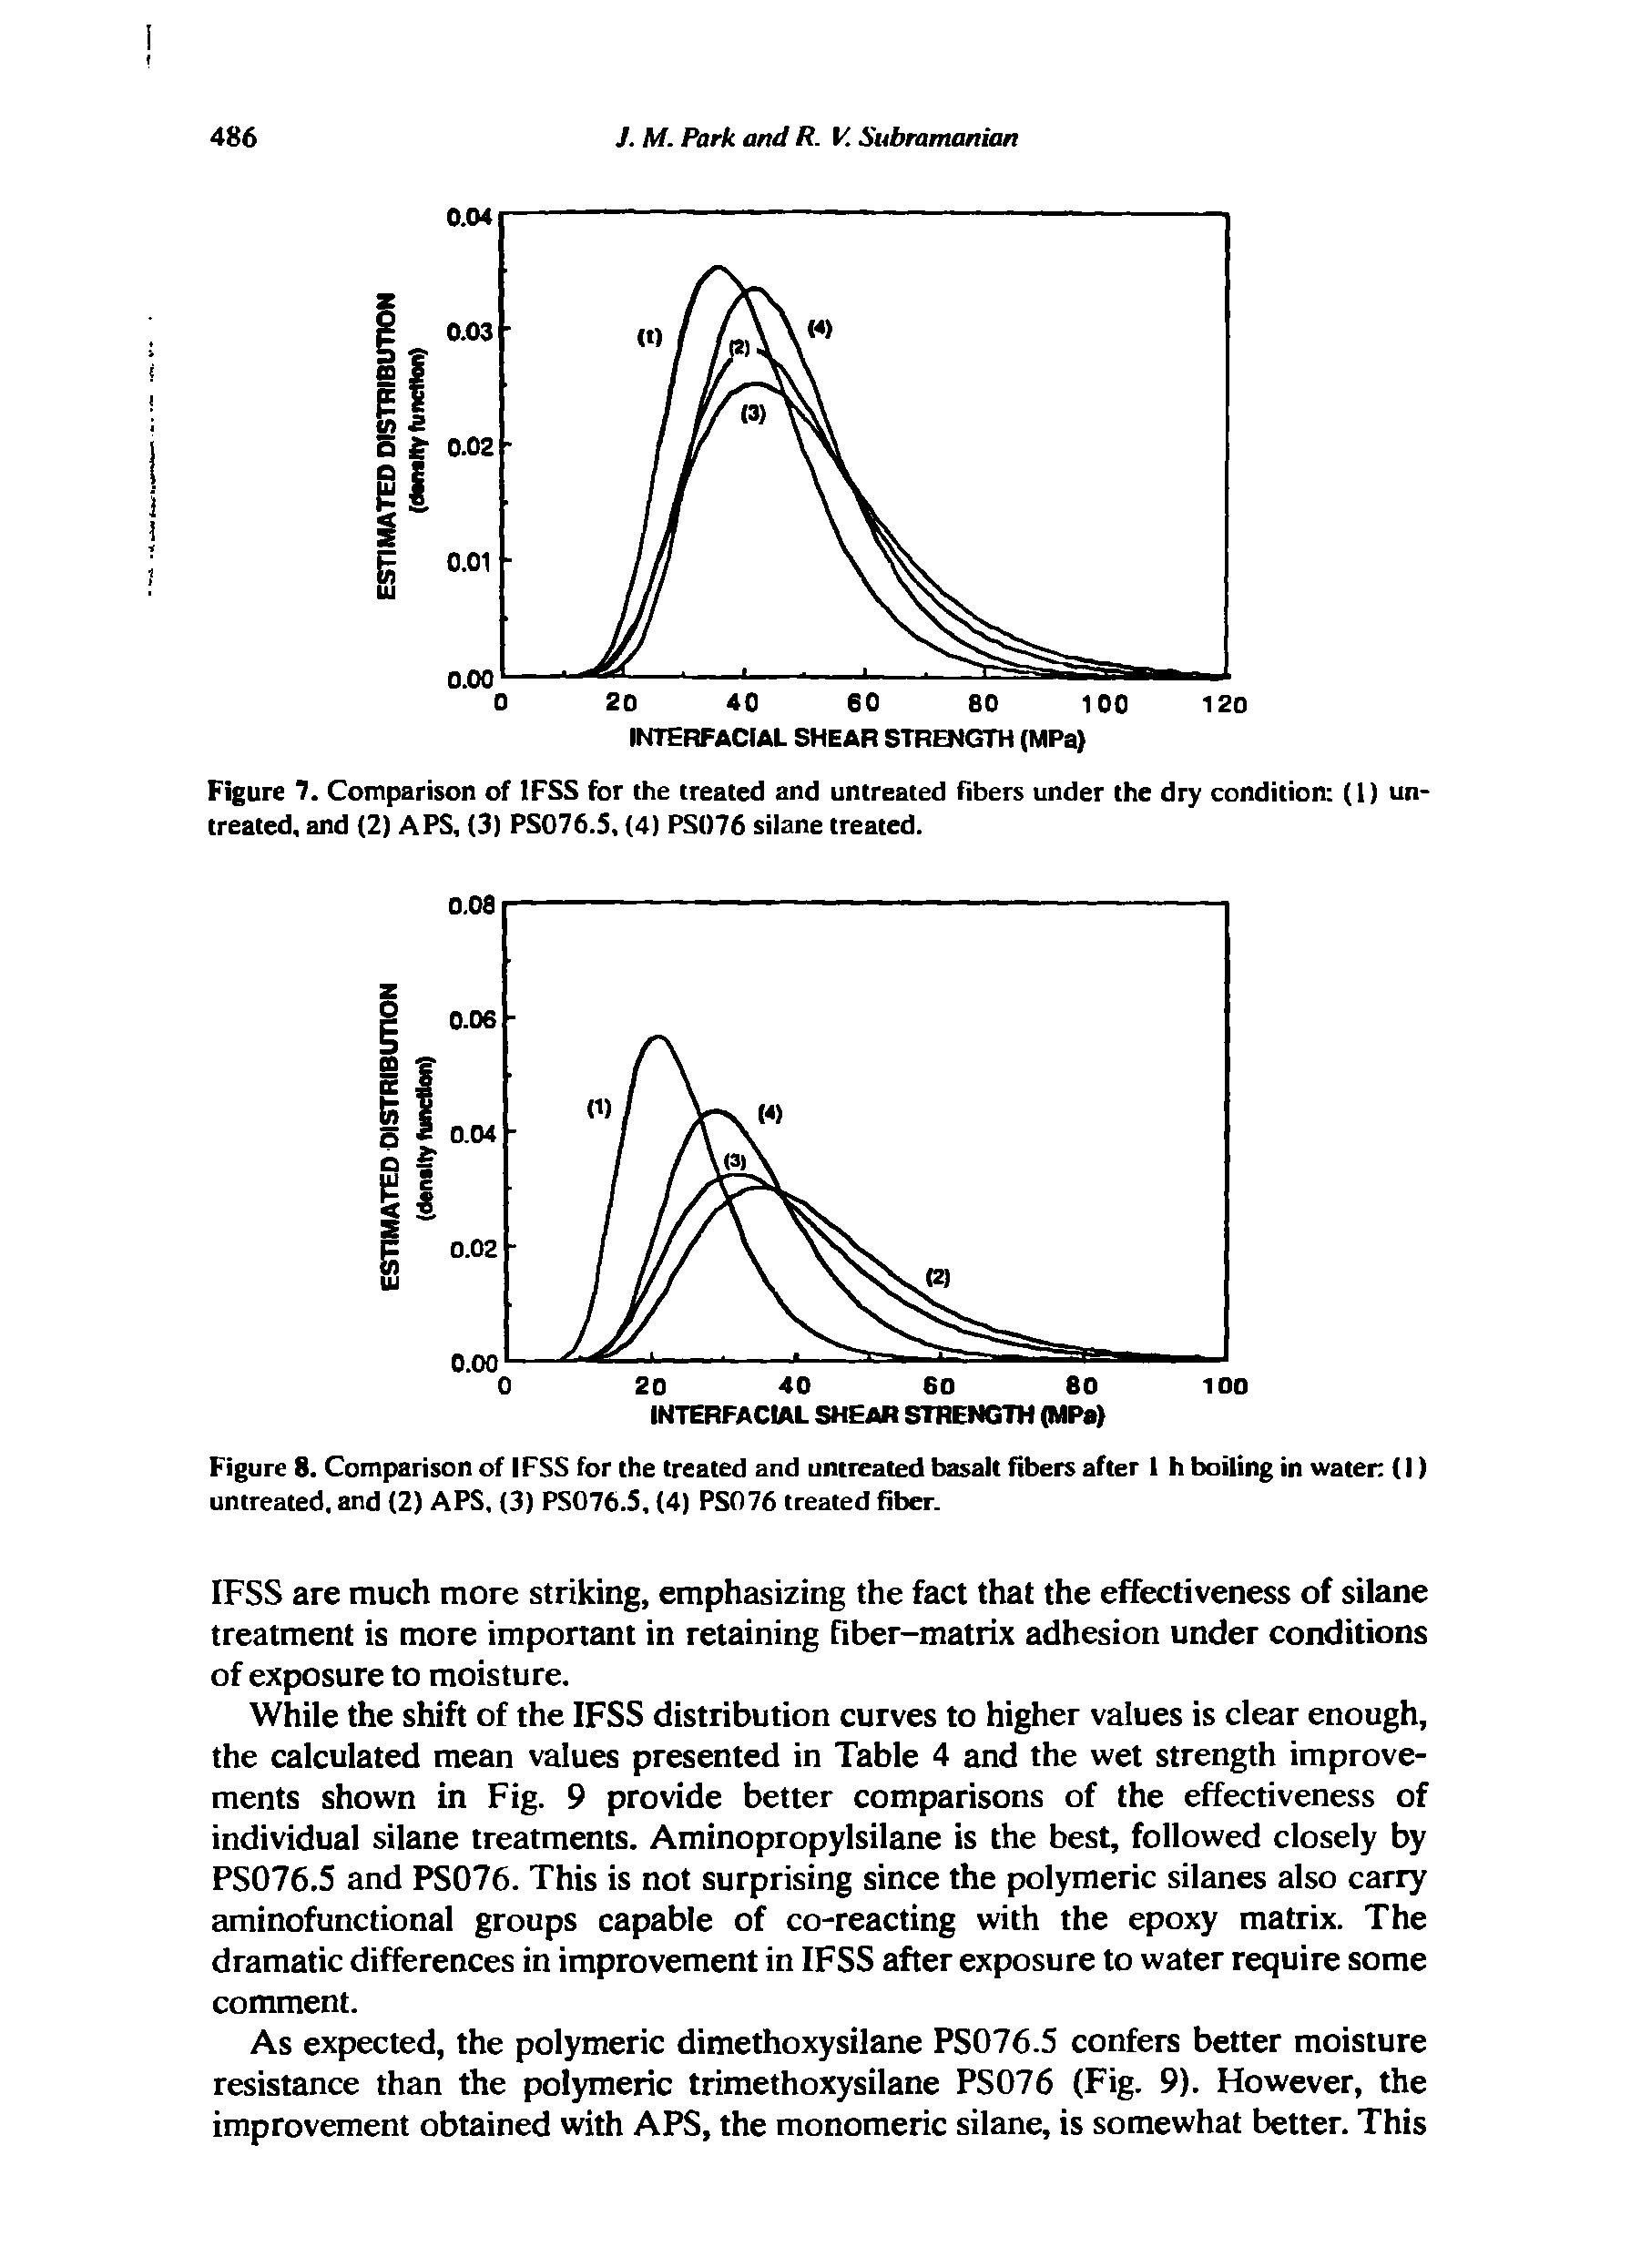 Figure 8. Comparison of IFSS for the treated and untreated basalt fibers after 1 h boiling in water (I) untreated, and (2) APS, (3) PS076.5, (4) PS076 treated fiber.